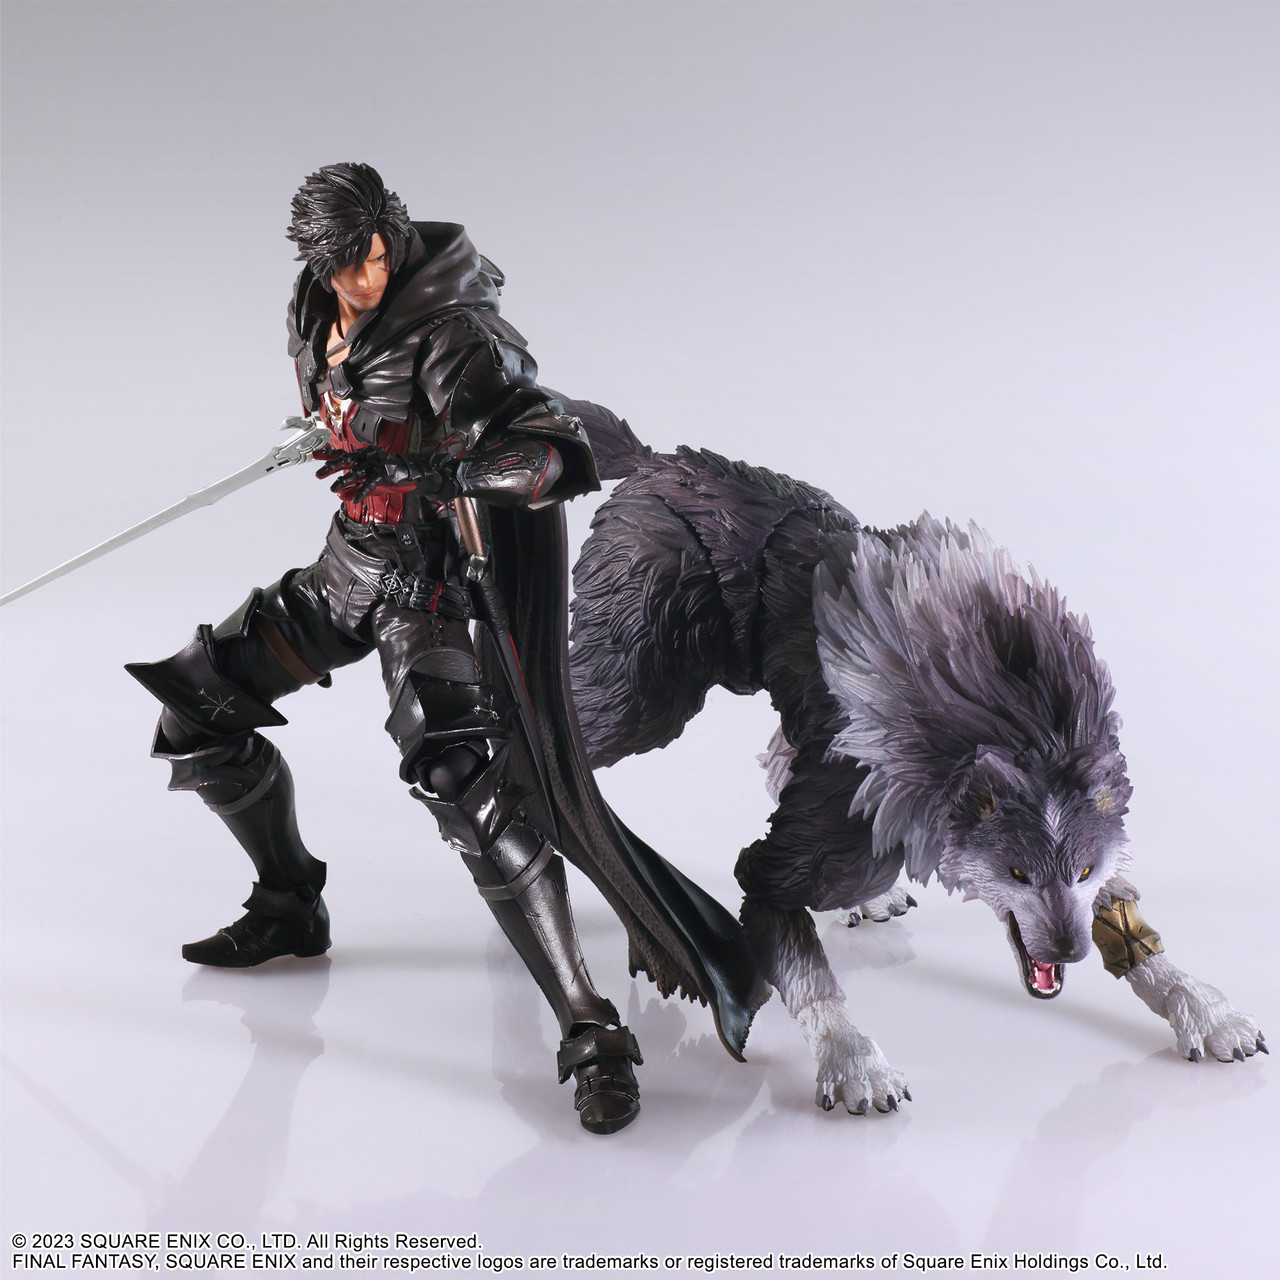 Square Enix on X: [US Only] Get FREE SHIPPING on all qualifying orders  over $59.99 on a wide range of games, merchandise, soundtracks and more  from the Square Enix Store during our #